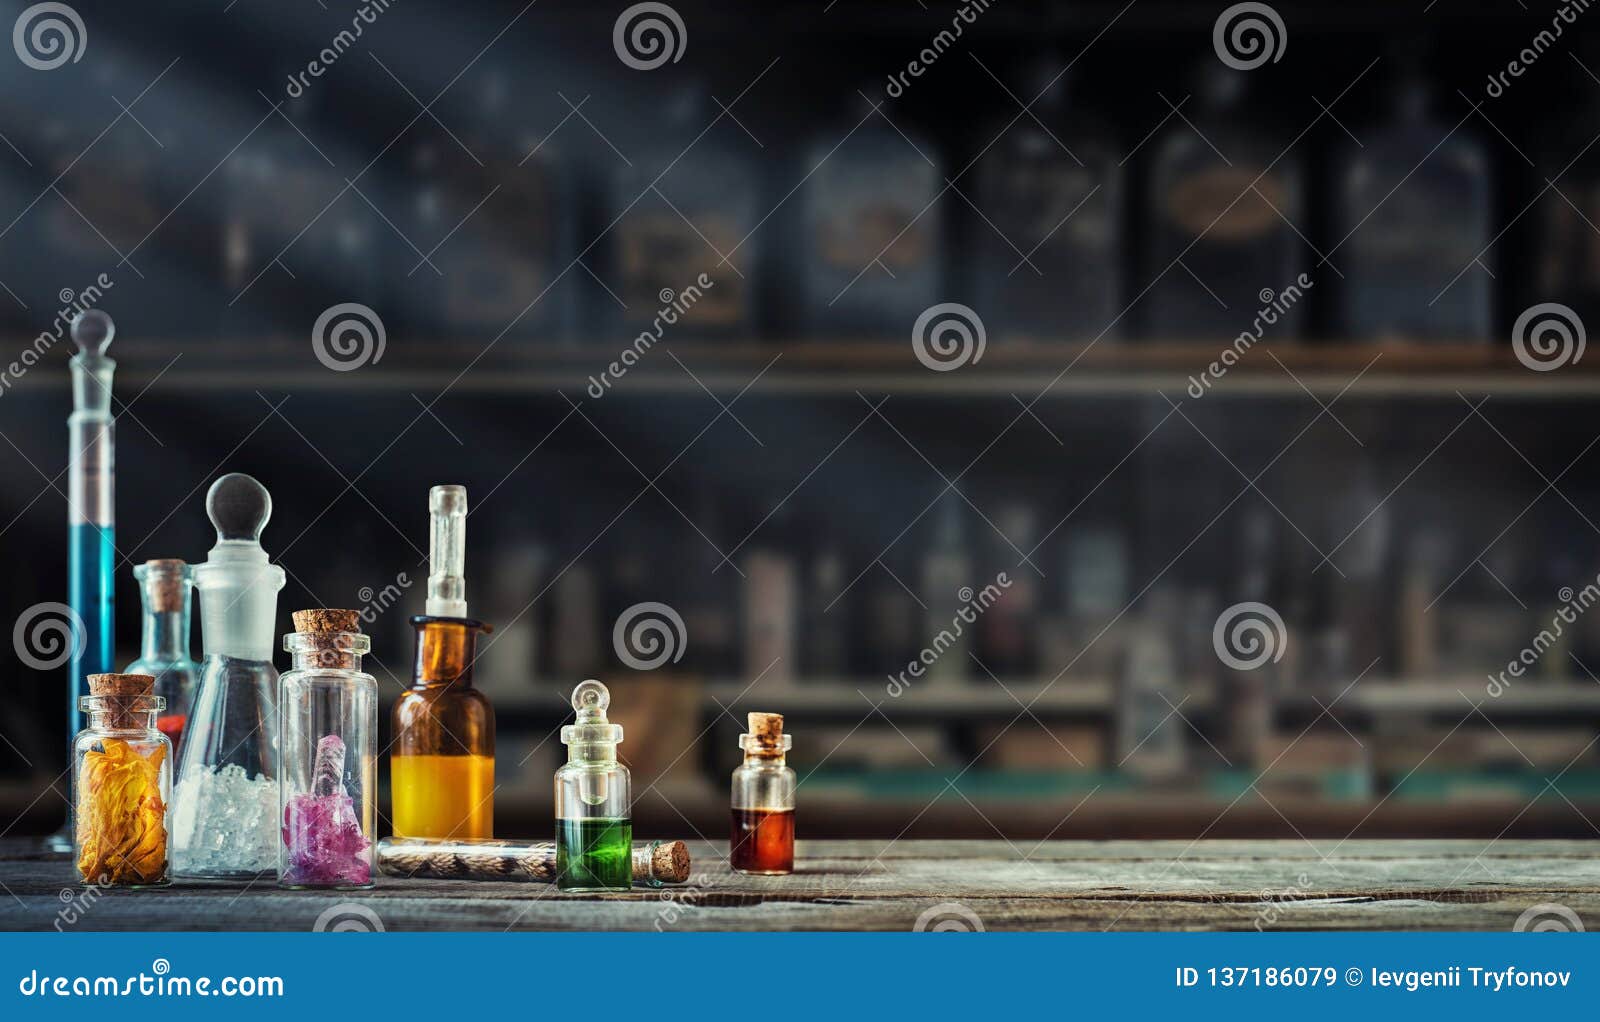 166,777 Chemistry Background Stock Photos - Free & Royalty-Free Stock  Photos from Dreamstime